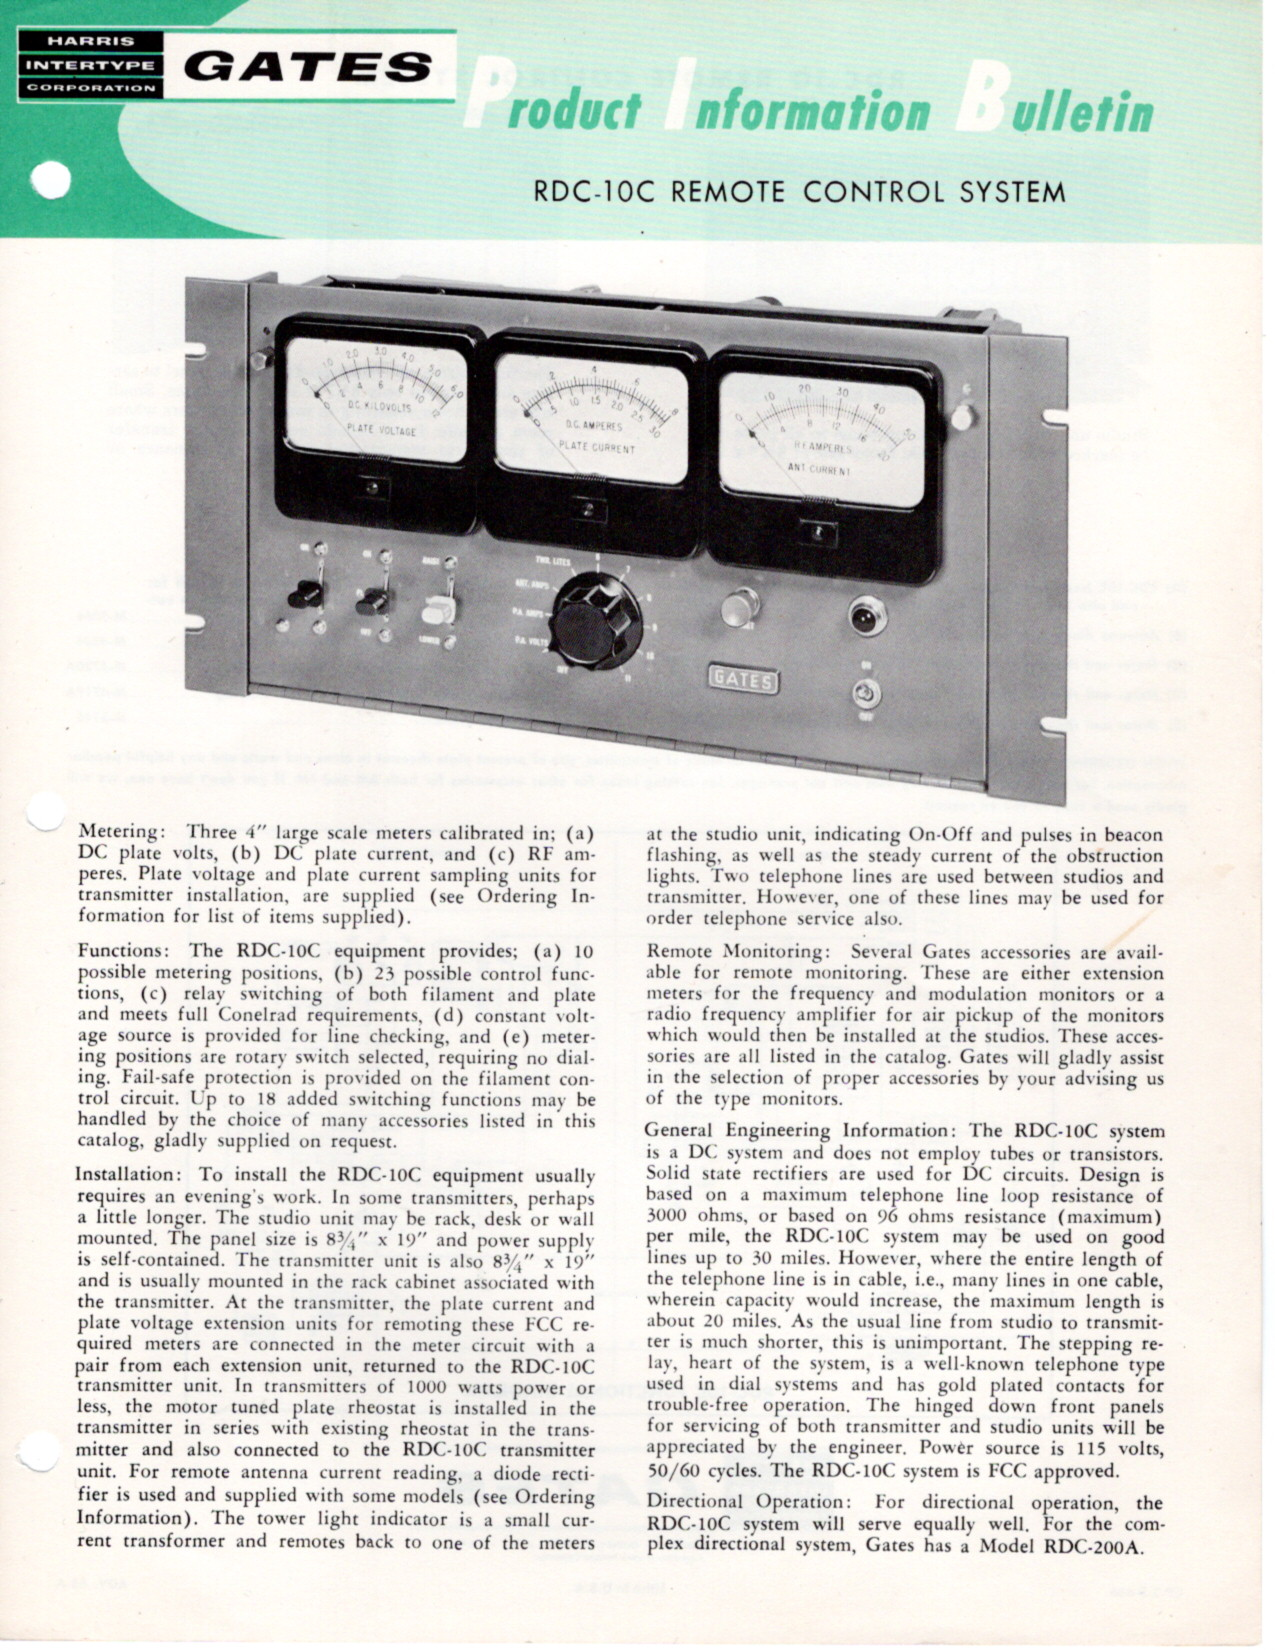 The FIRST FM Transmitter Remote Control<br>Analog - Required 2 DC Circuits